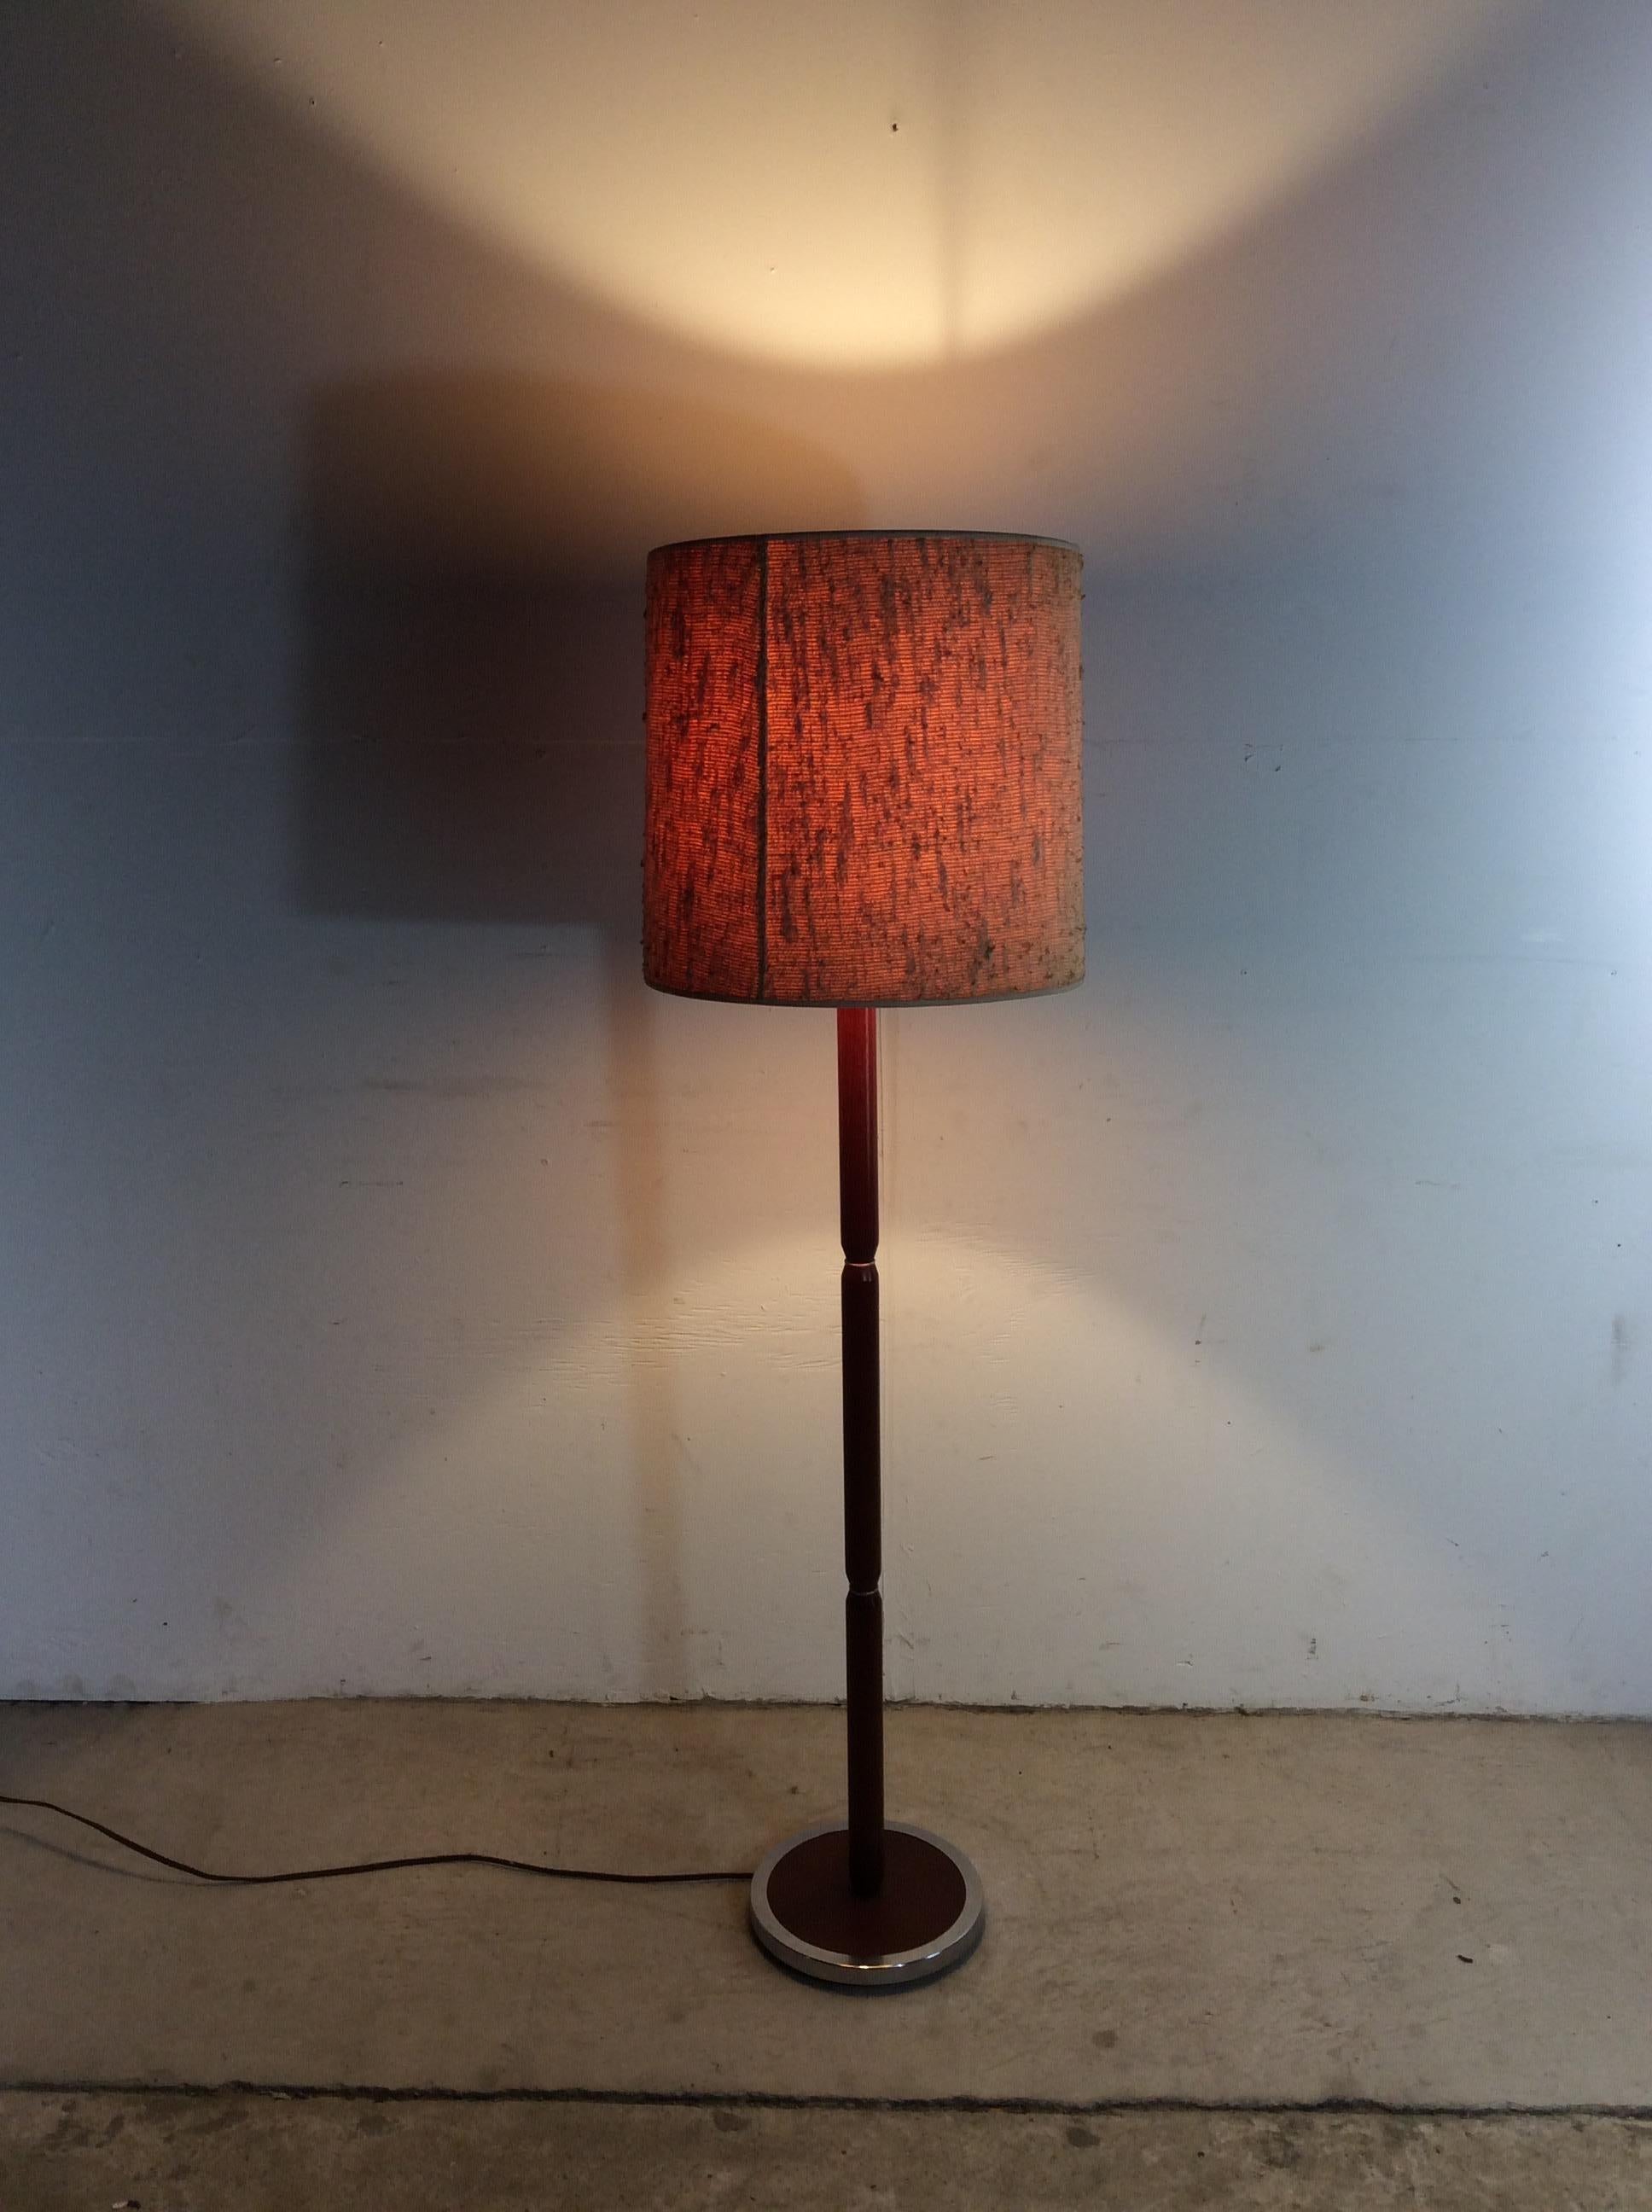 This Danish modern floor lamp features hardwood construction, original teak finish, chrome accented base, and vintage barrel shade.  Dimensions with shade: 15w 15d 56h

Dimensions: 10w 10d 56h

Condition: Original teak finish is in excellent